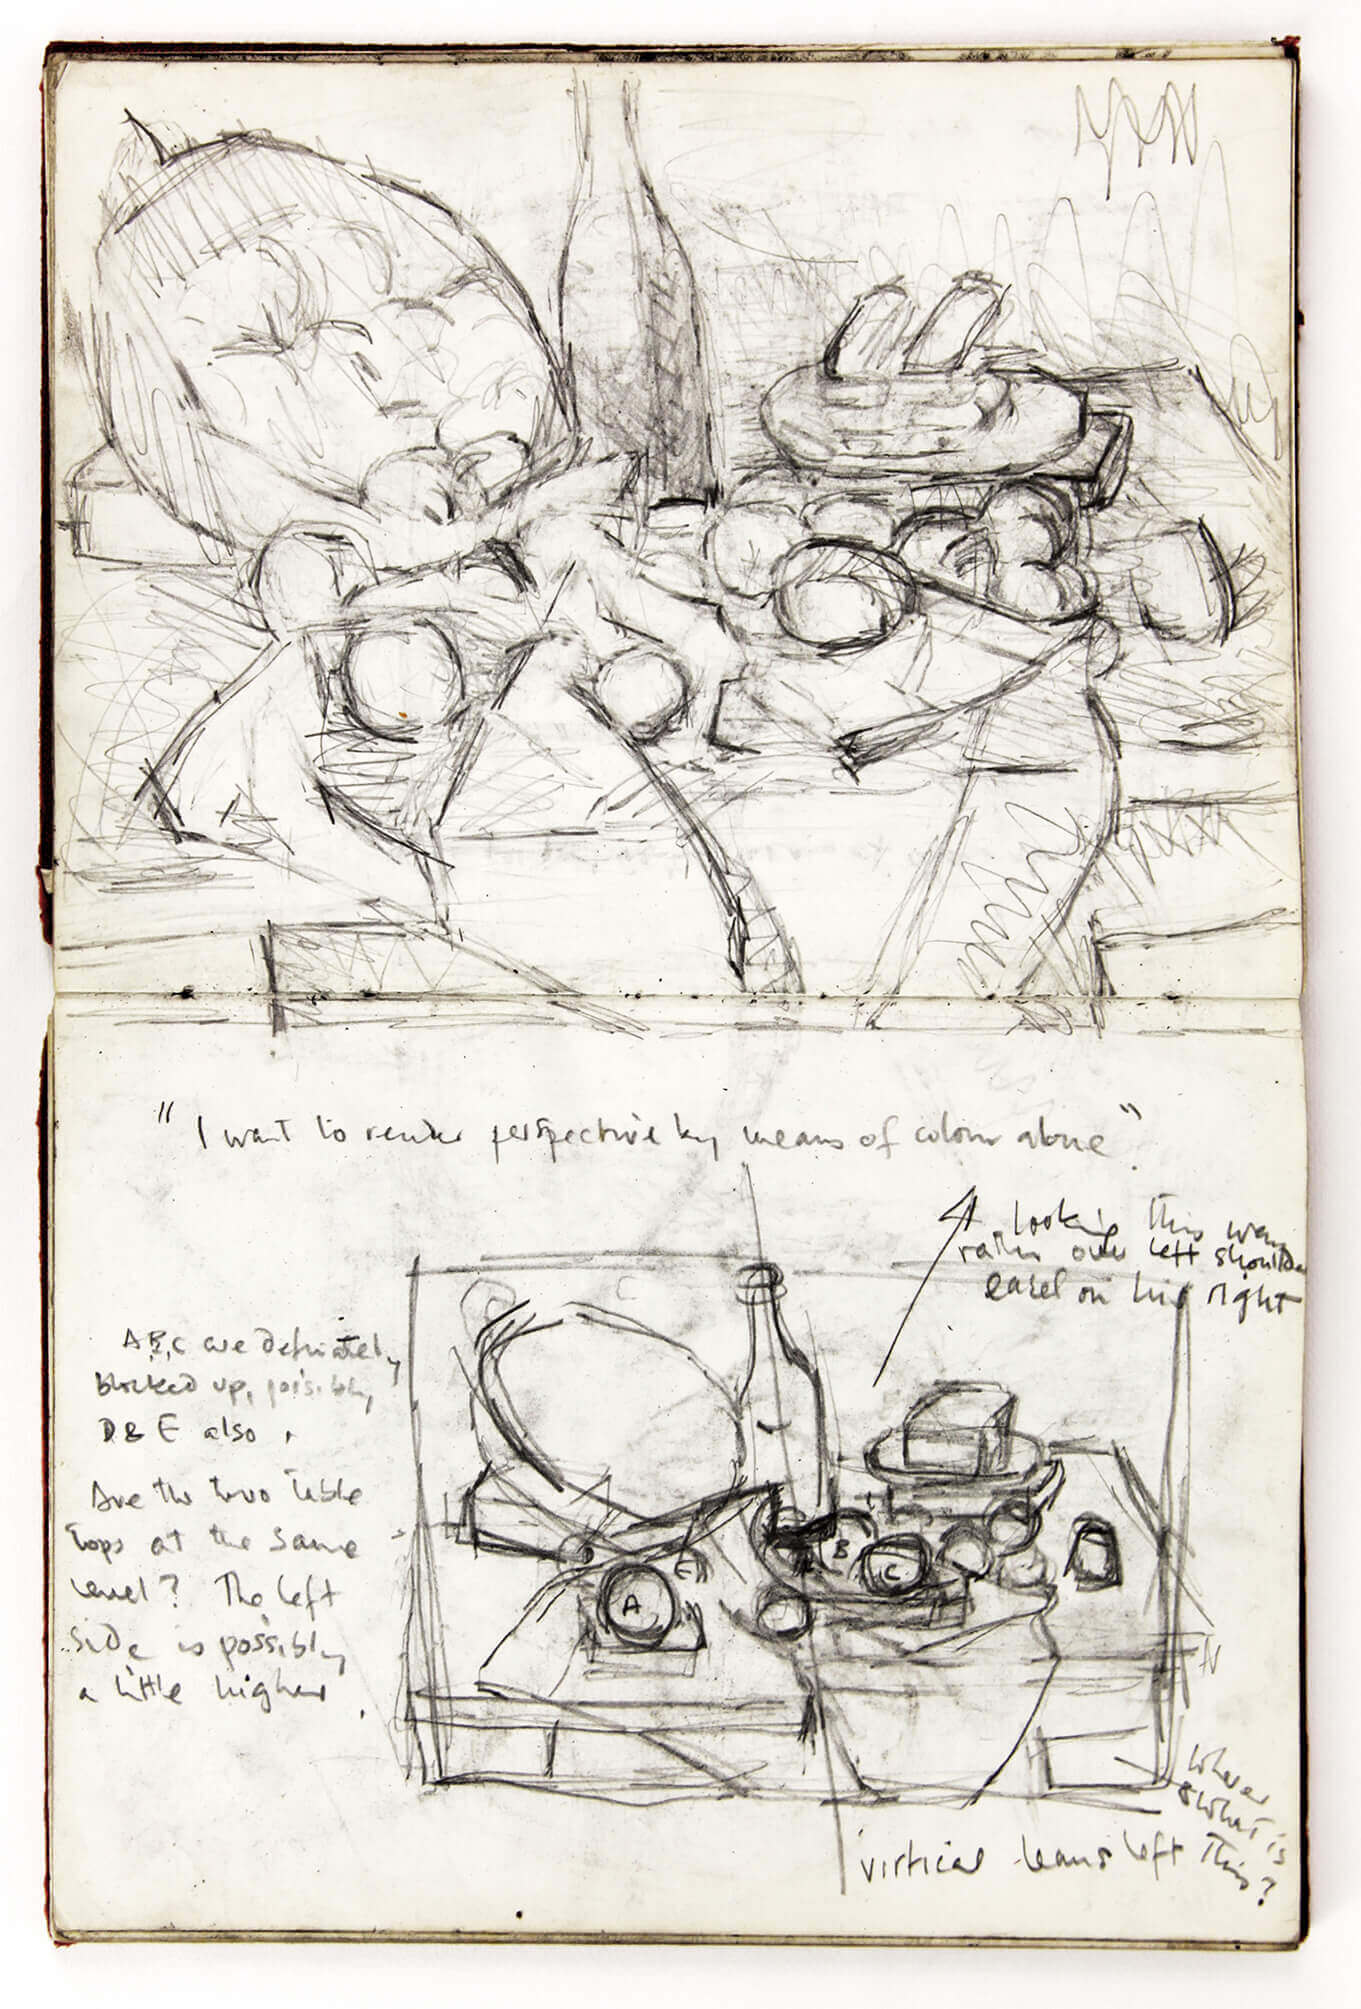 Sargy Mann, Sketchbook, Cézanne Studies (Sargy Mann estate)<br /><br />Sketchbook notes by Sargy Man include: “I want to render perspective by means of colour alone” Cézanne, from Joachim Gasquet’s <em>Conversations with Cézanne</em> as well as notations about how Cézanne used different surface heights and hidden blocks to disrupt expected spatial arrangements.